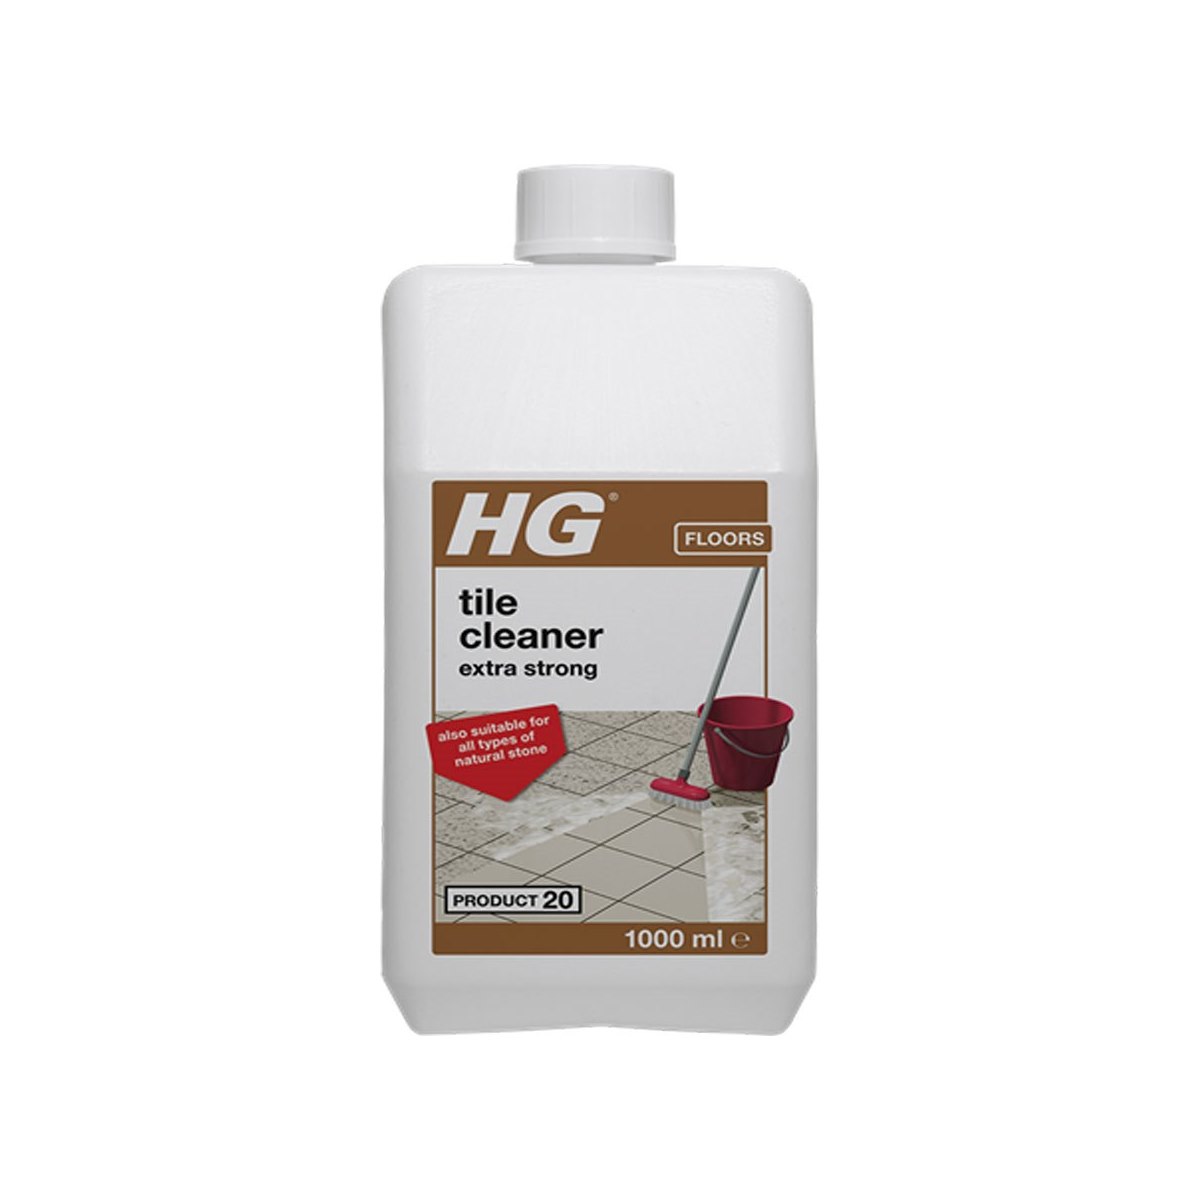 HG Tile Cleaner Extra Strong P20 1 Litre